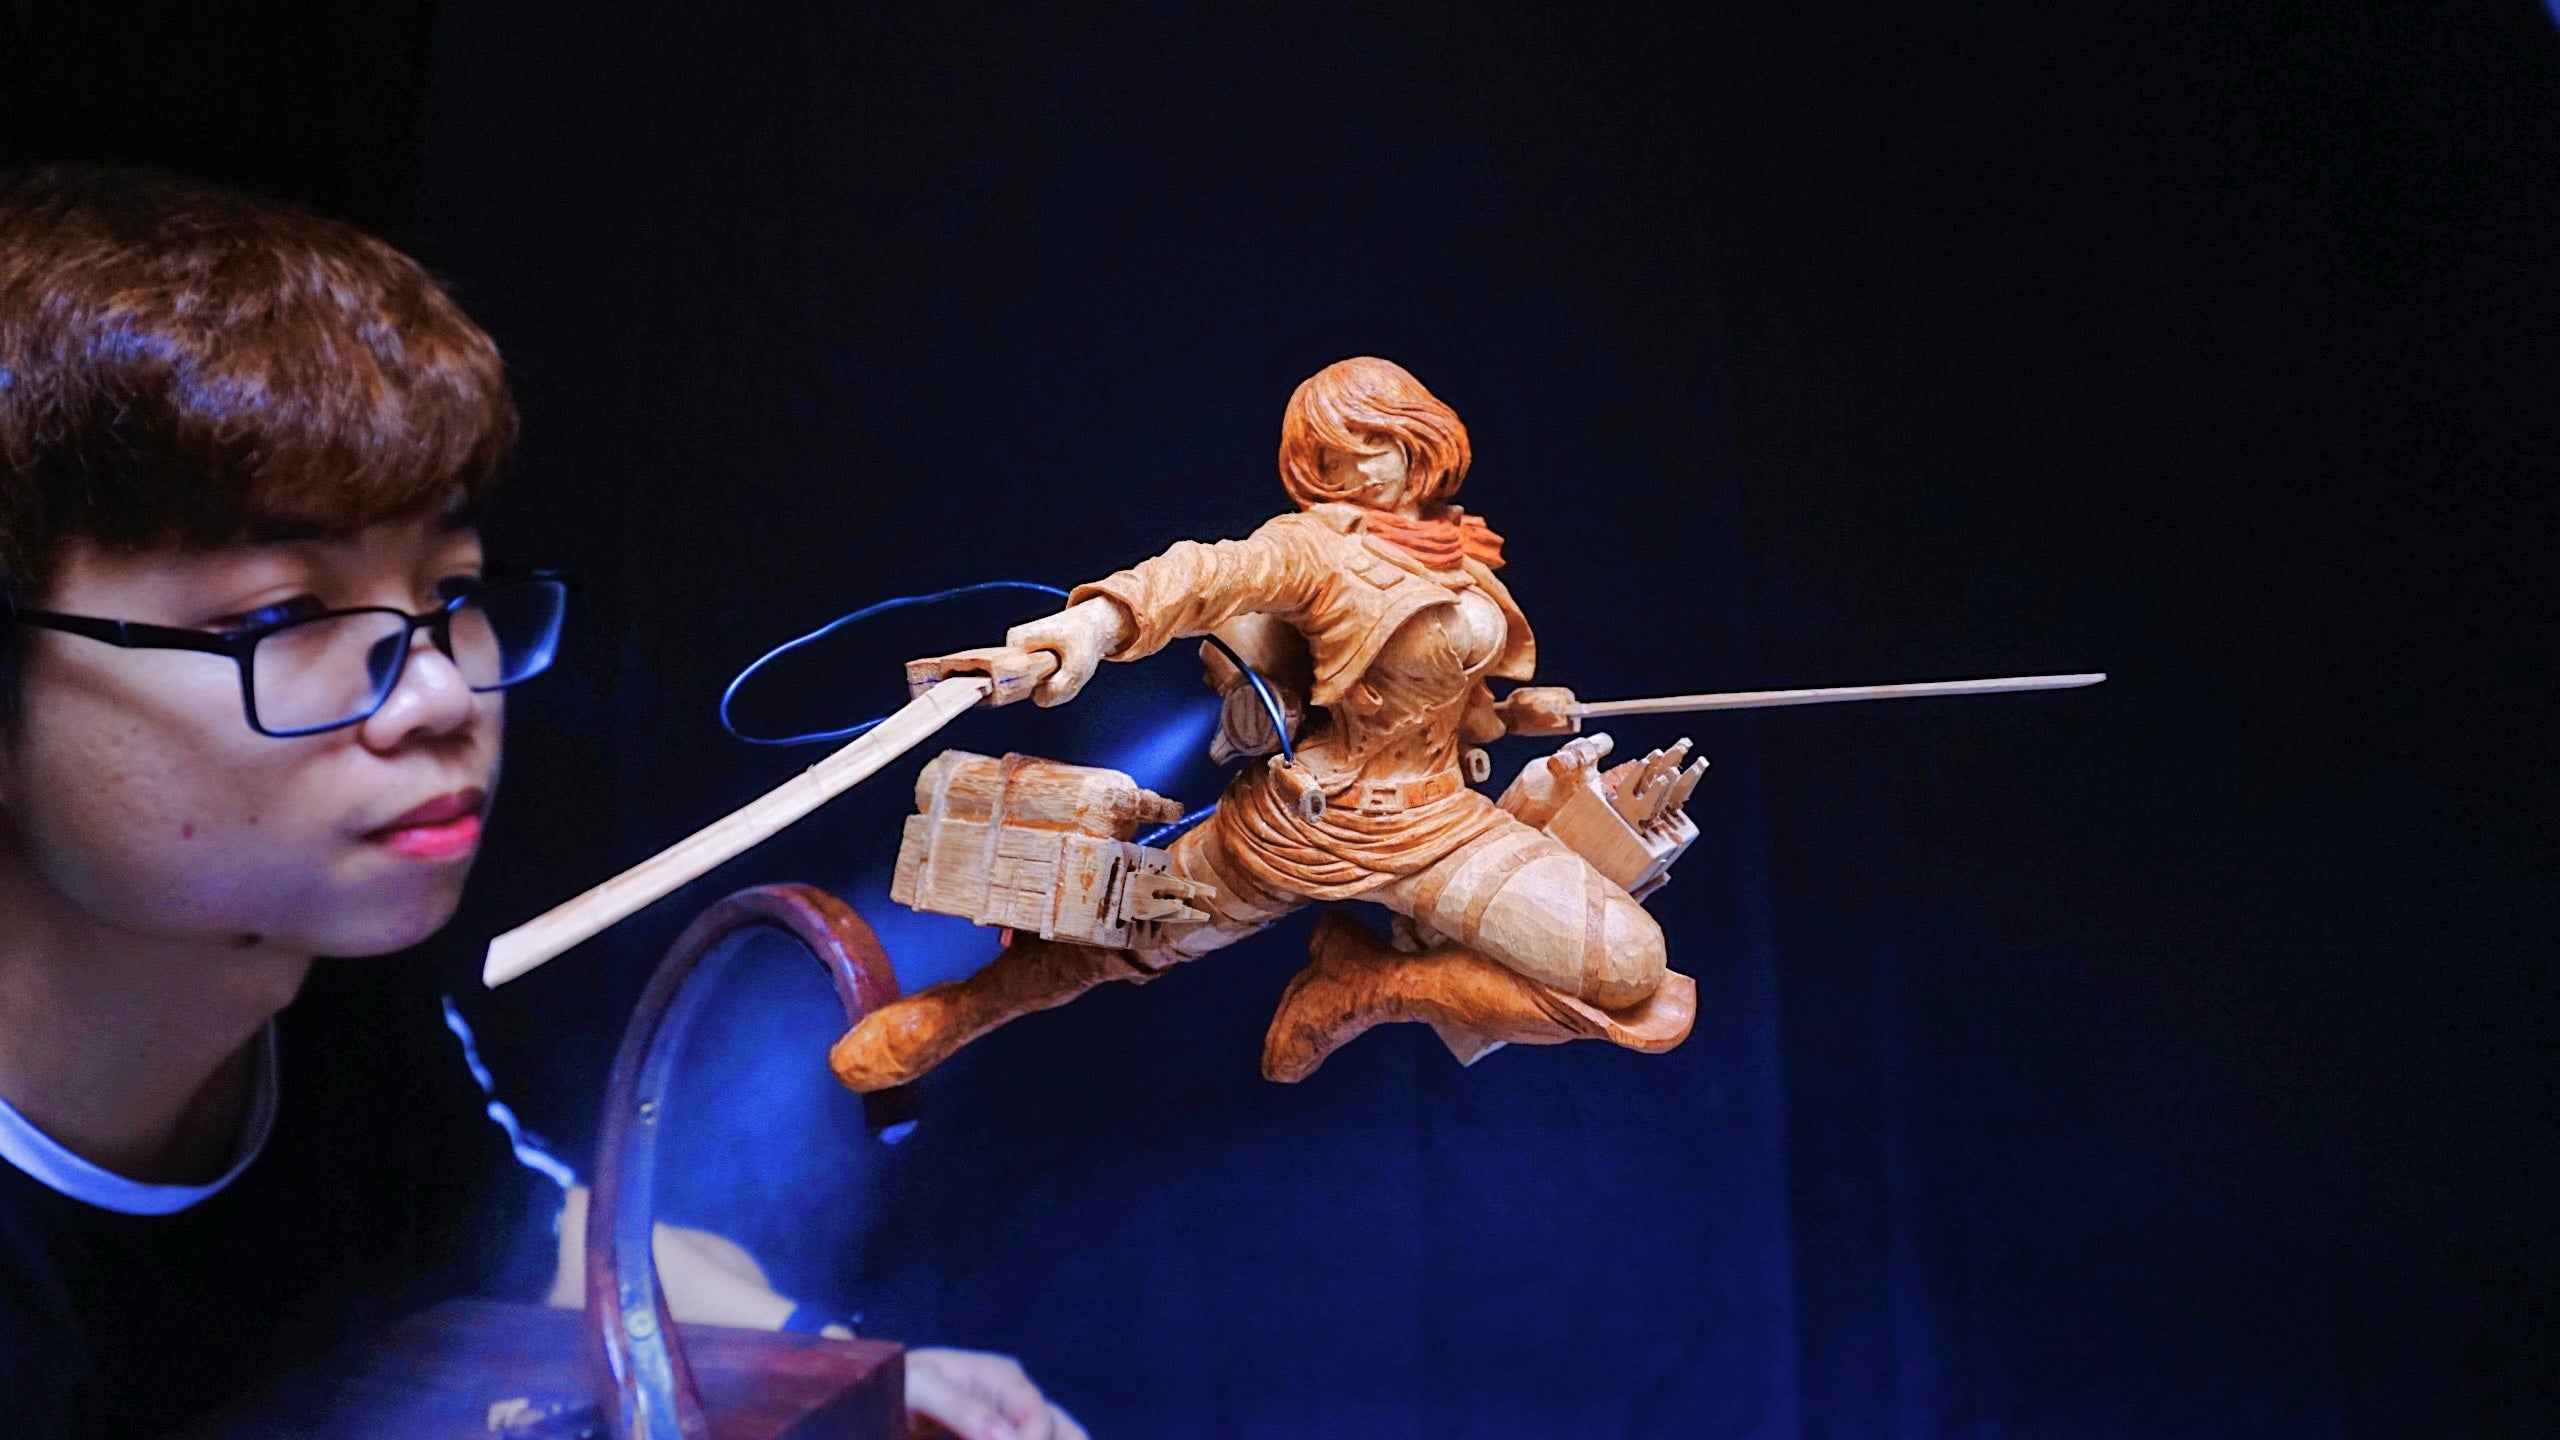 Mikasa Figure Wood carving - Flying with 3D Maneuver Gear - Attack on Titan - Woodart Vietnam 